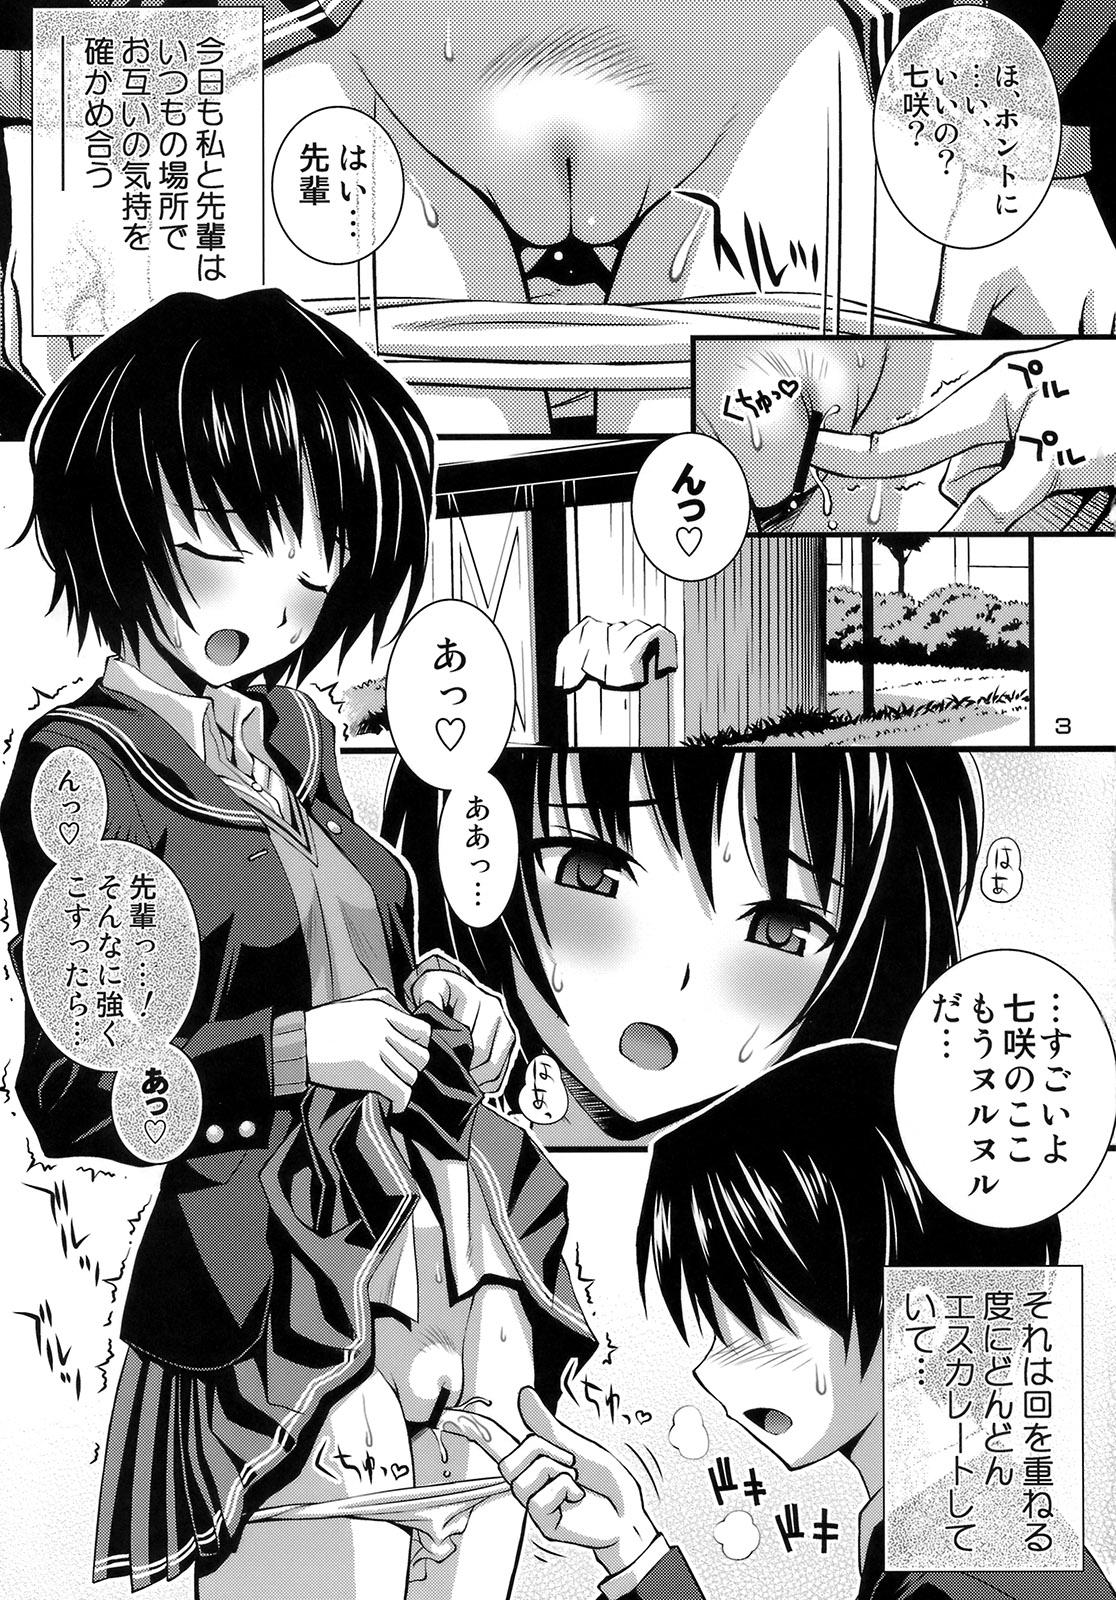 Natural Tits Steel Mayonnaise 11 - Amagami Stretch - Page 2